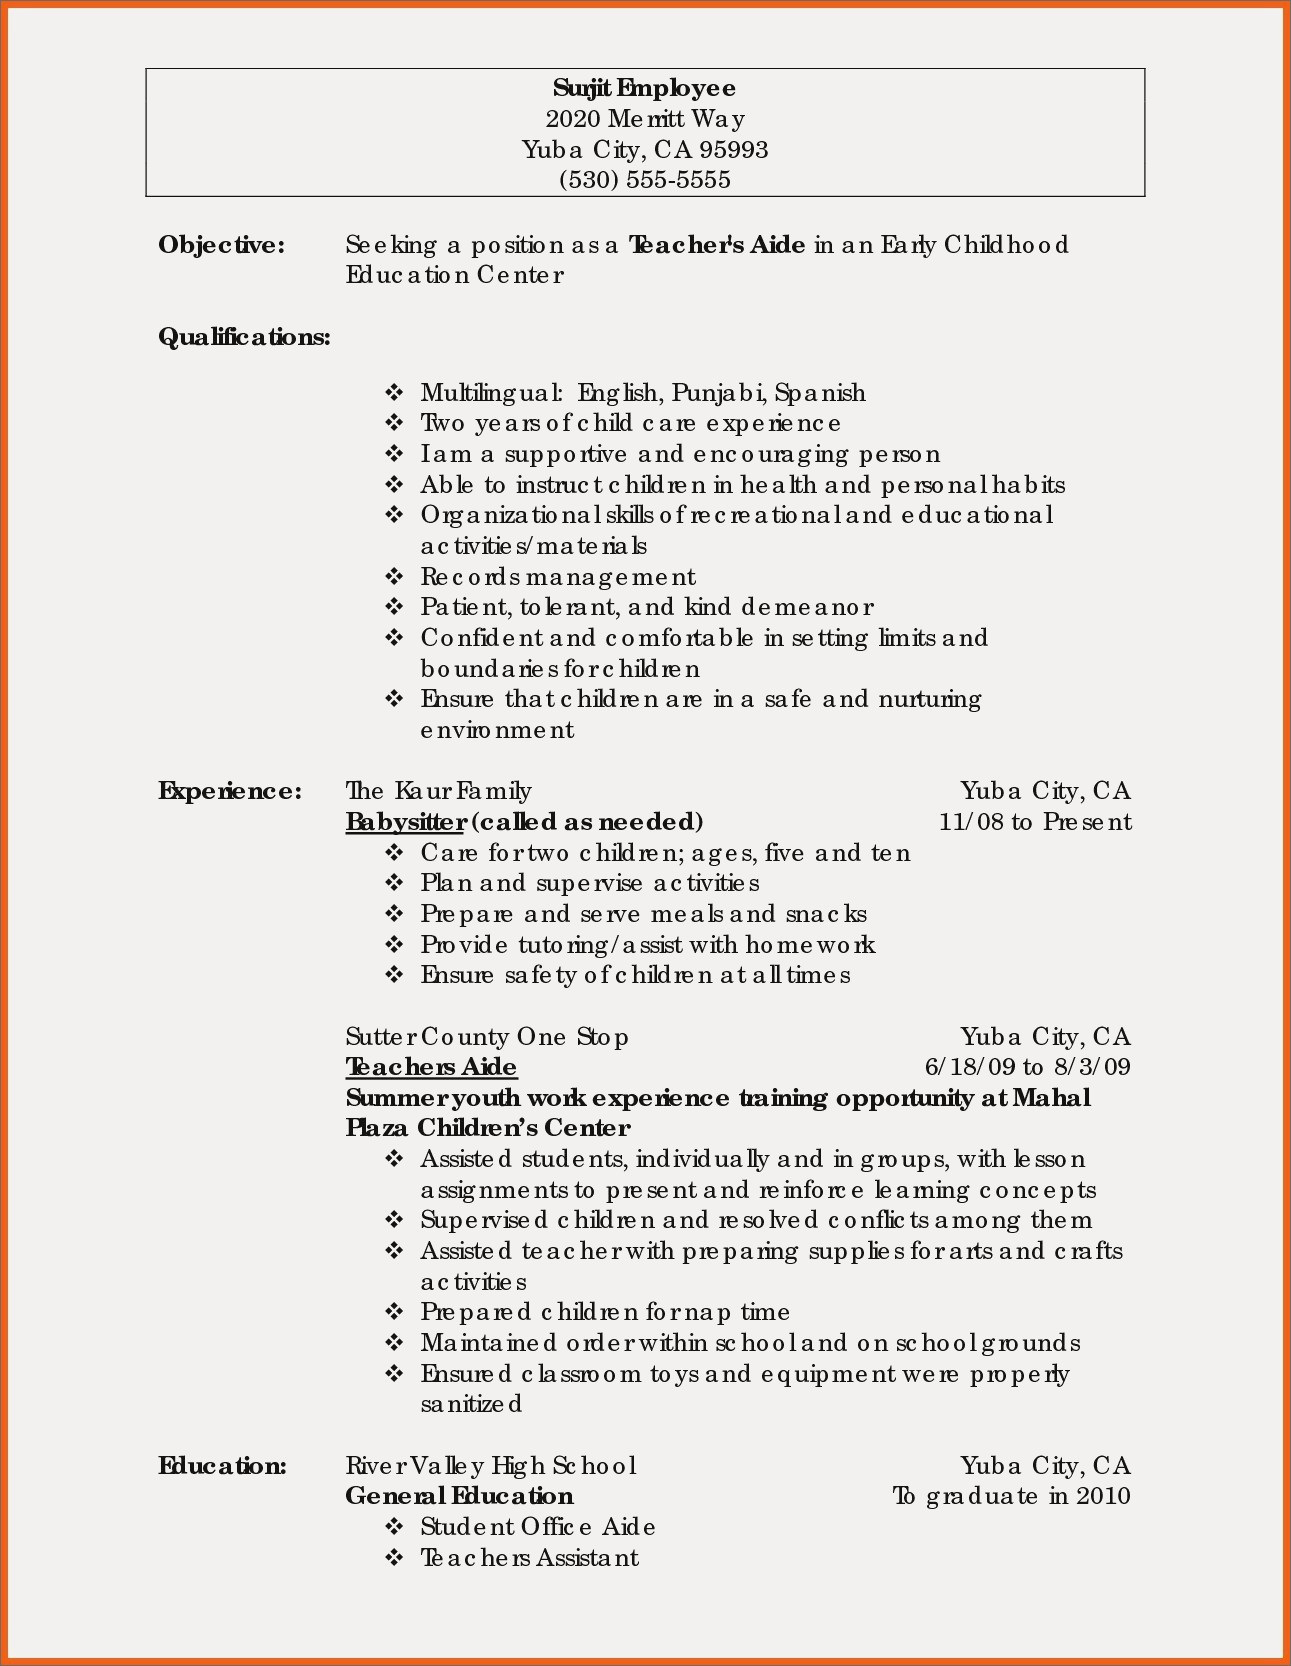 New Teacher Resume Resume Education Or Experience First Early Childhood Education